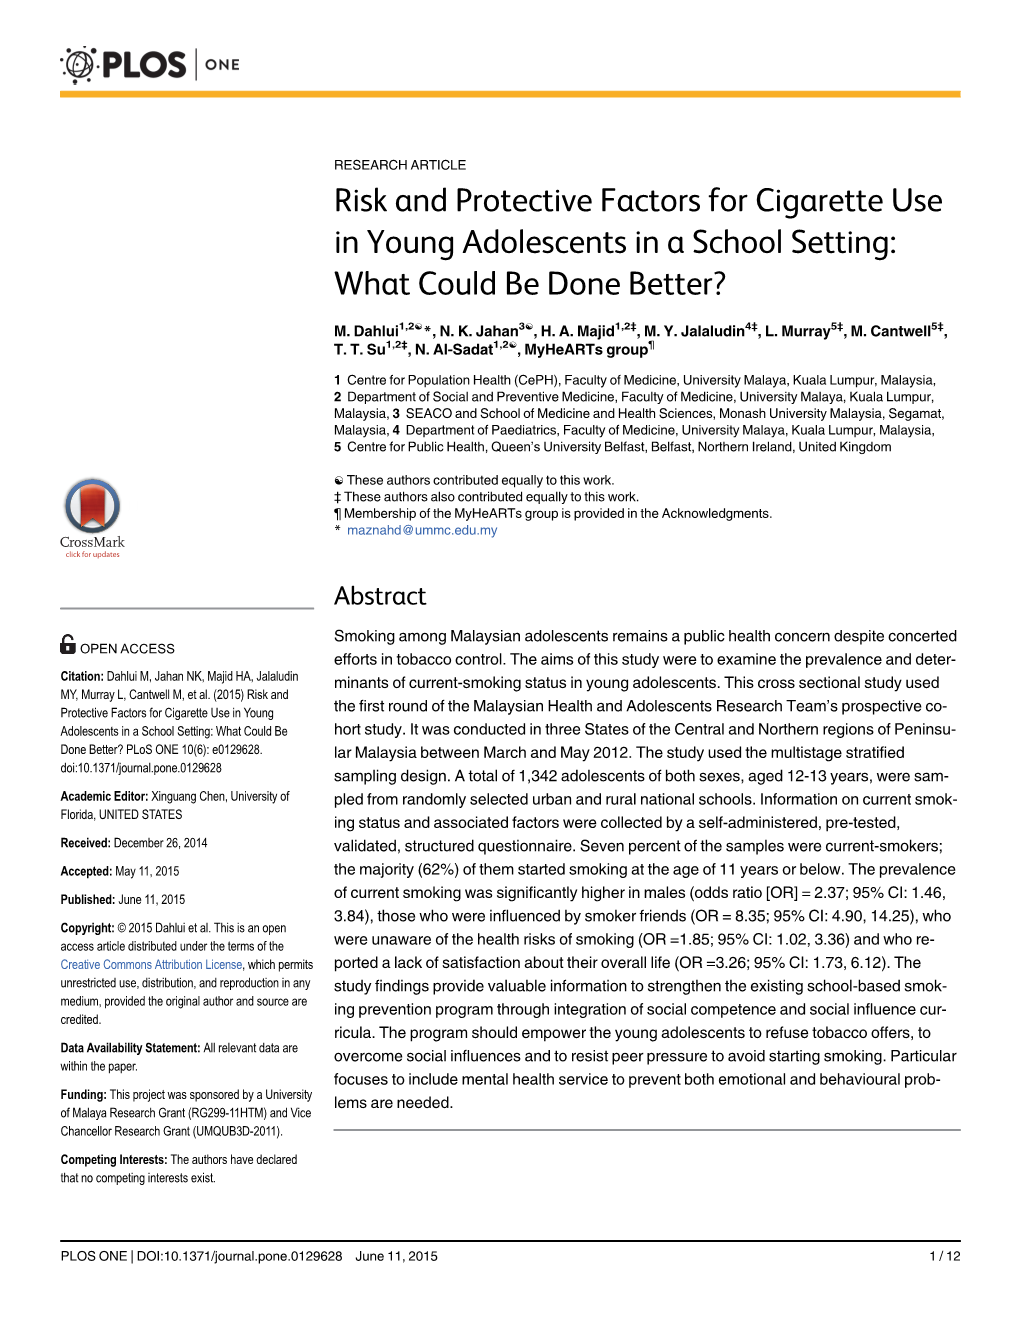 Risk and Protective Factors for Cigarette Use in Young Adolescents in a School Setting: What Could Be Done Better?